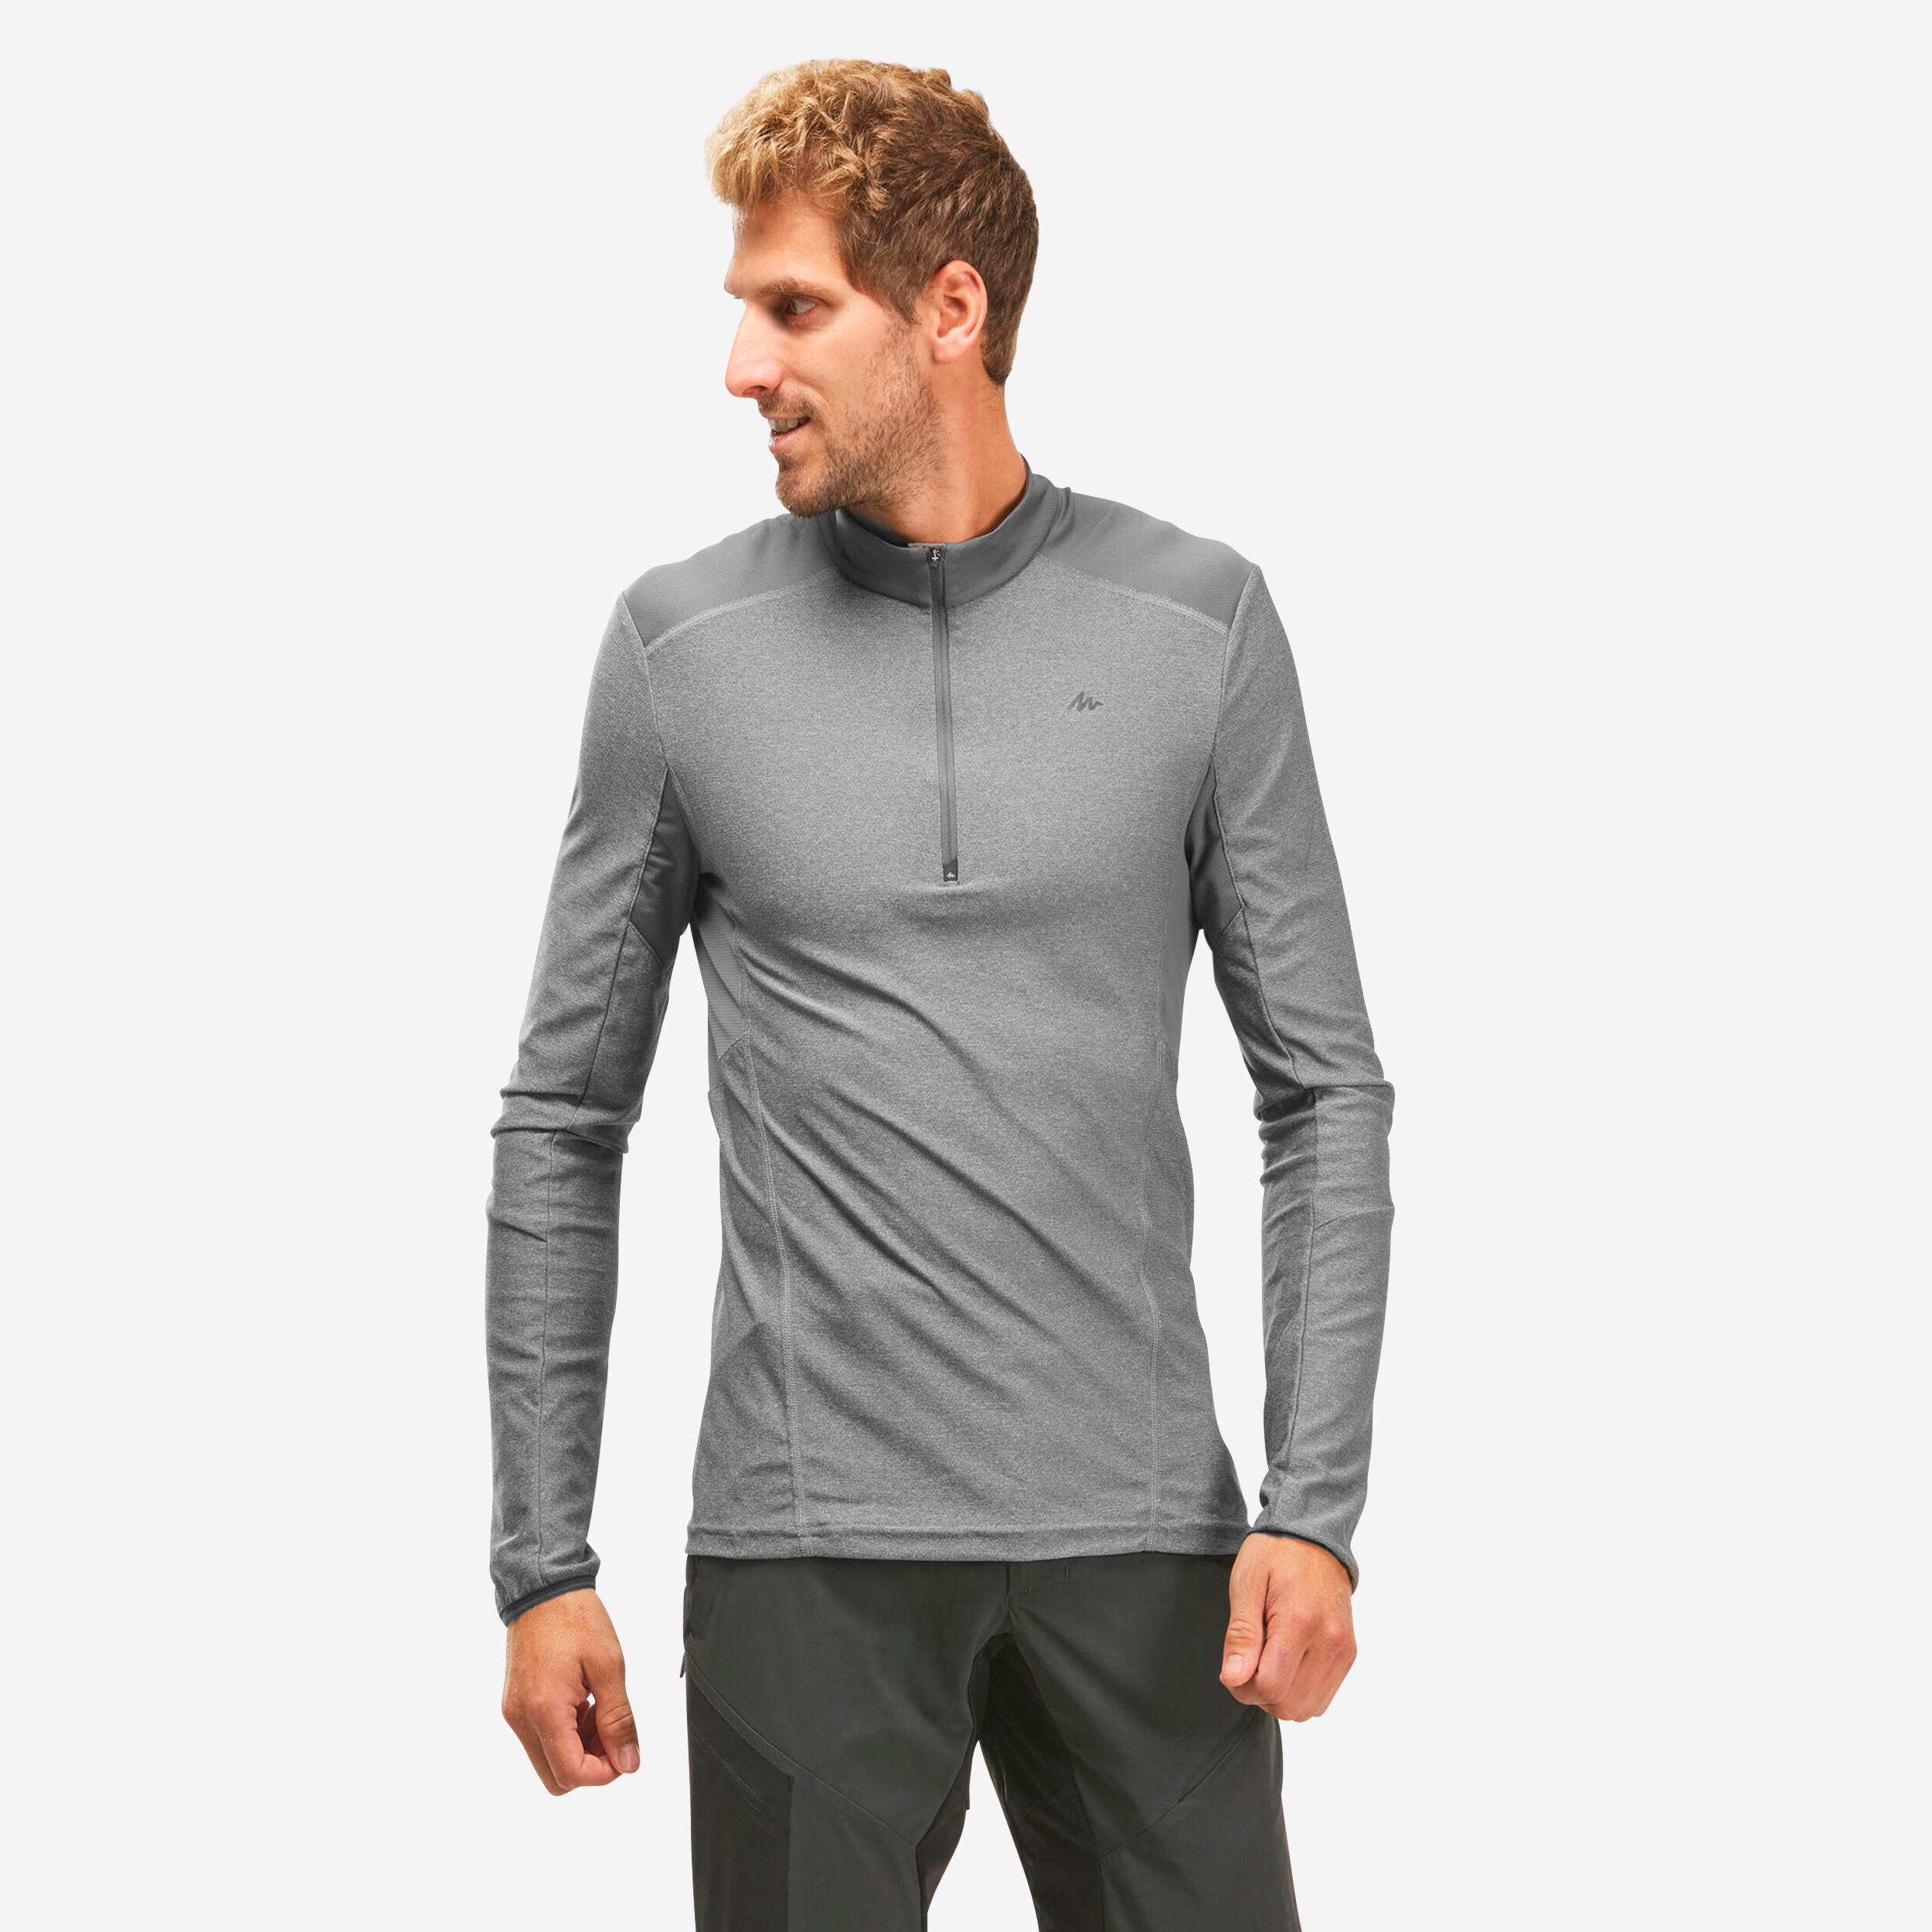 Men's Hiking Synthetic Long-Sleeved T-Shirt  MH550 1/4